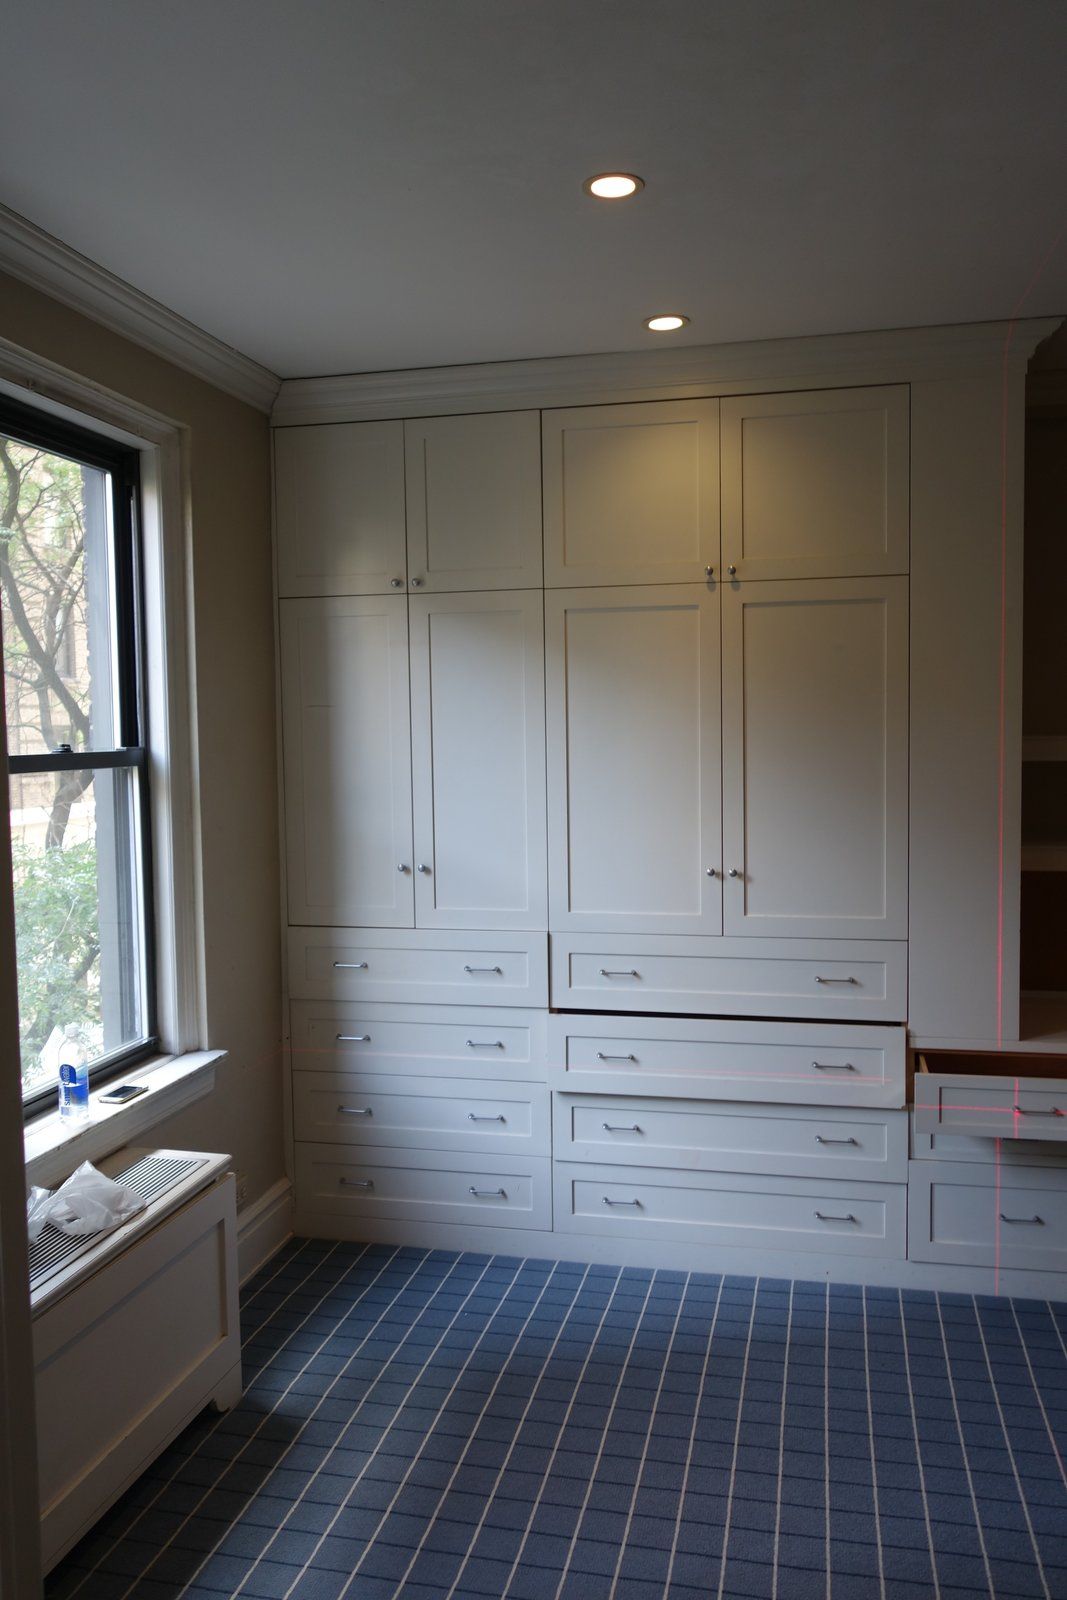 The second bedroom originally featured a large wall unit with lots and lots of storage